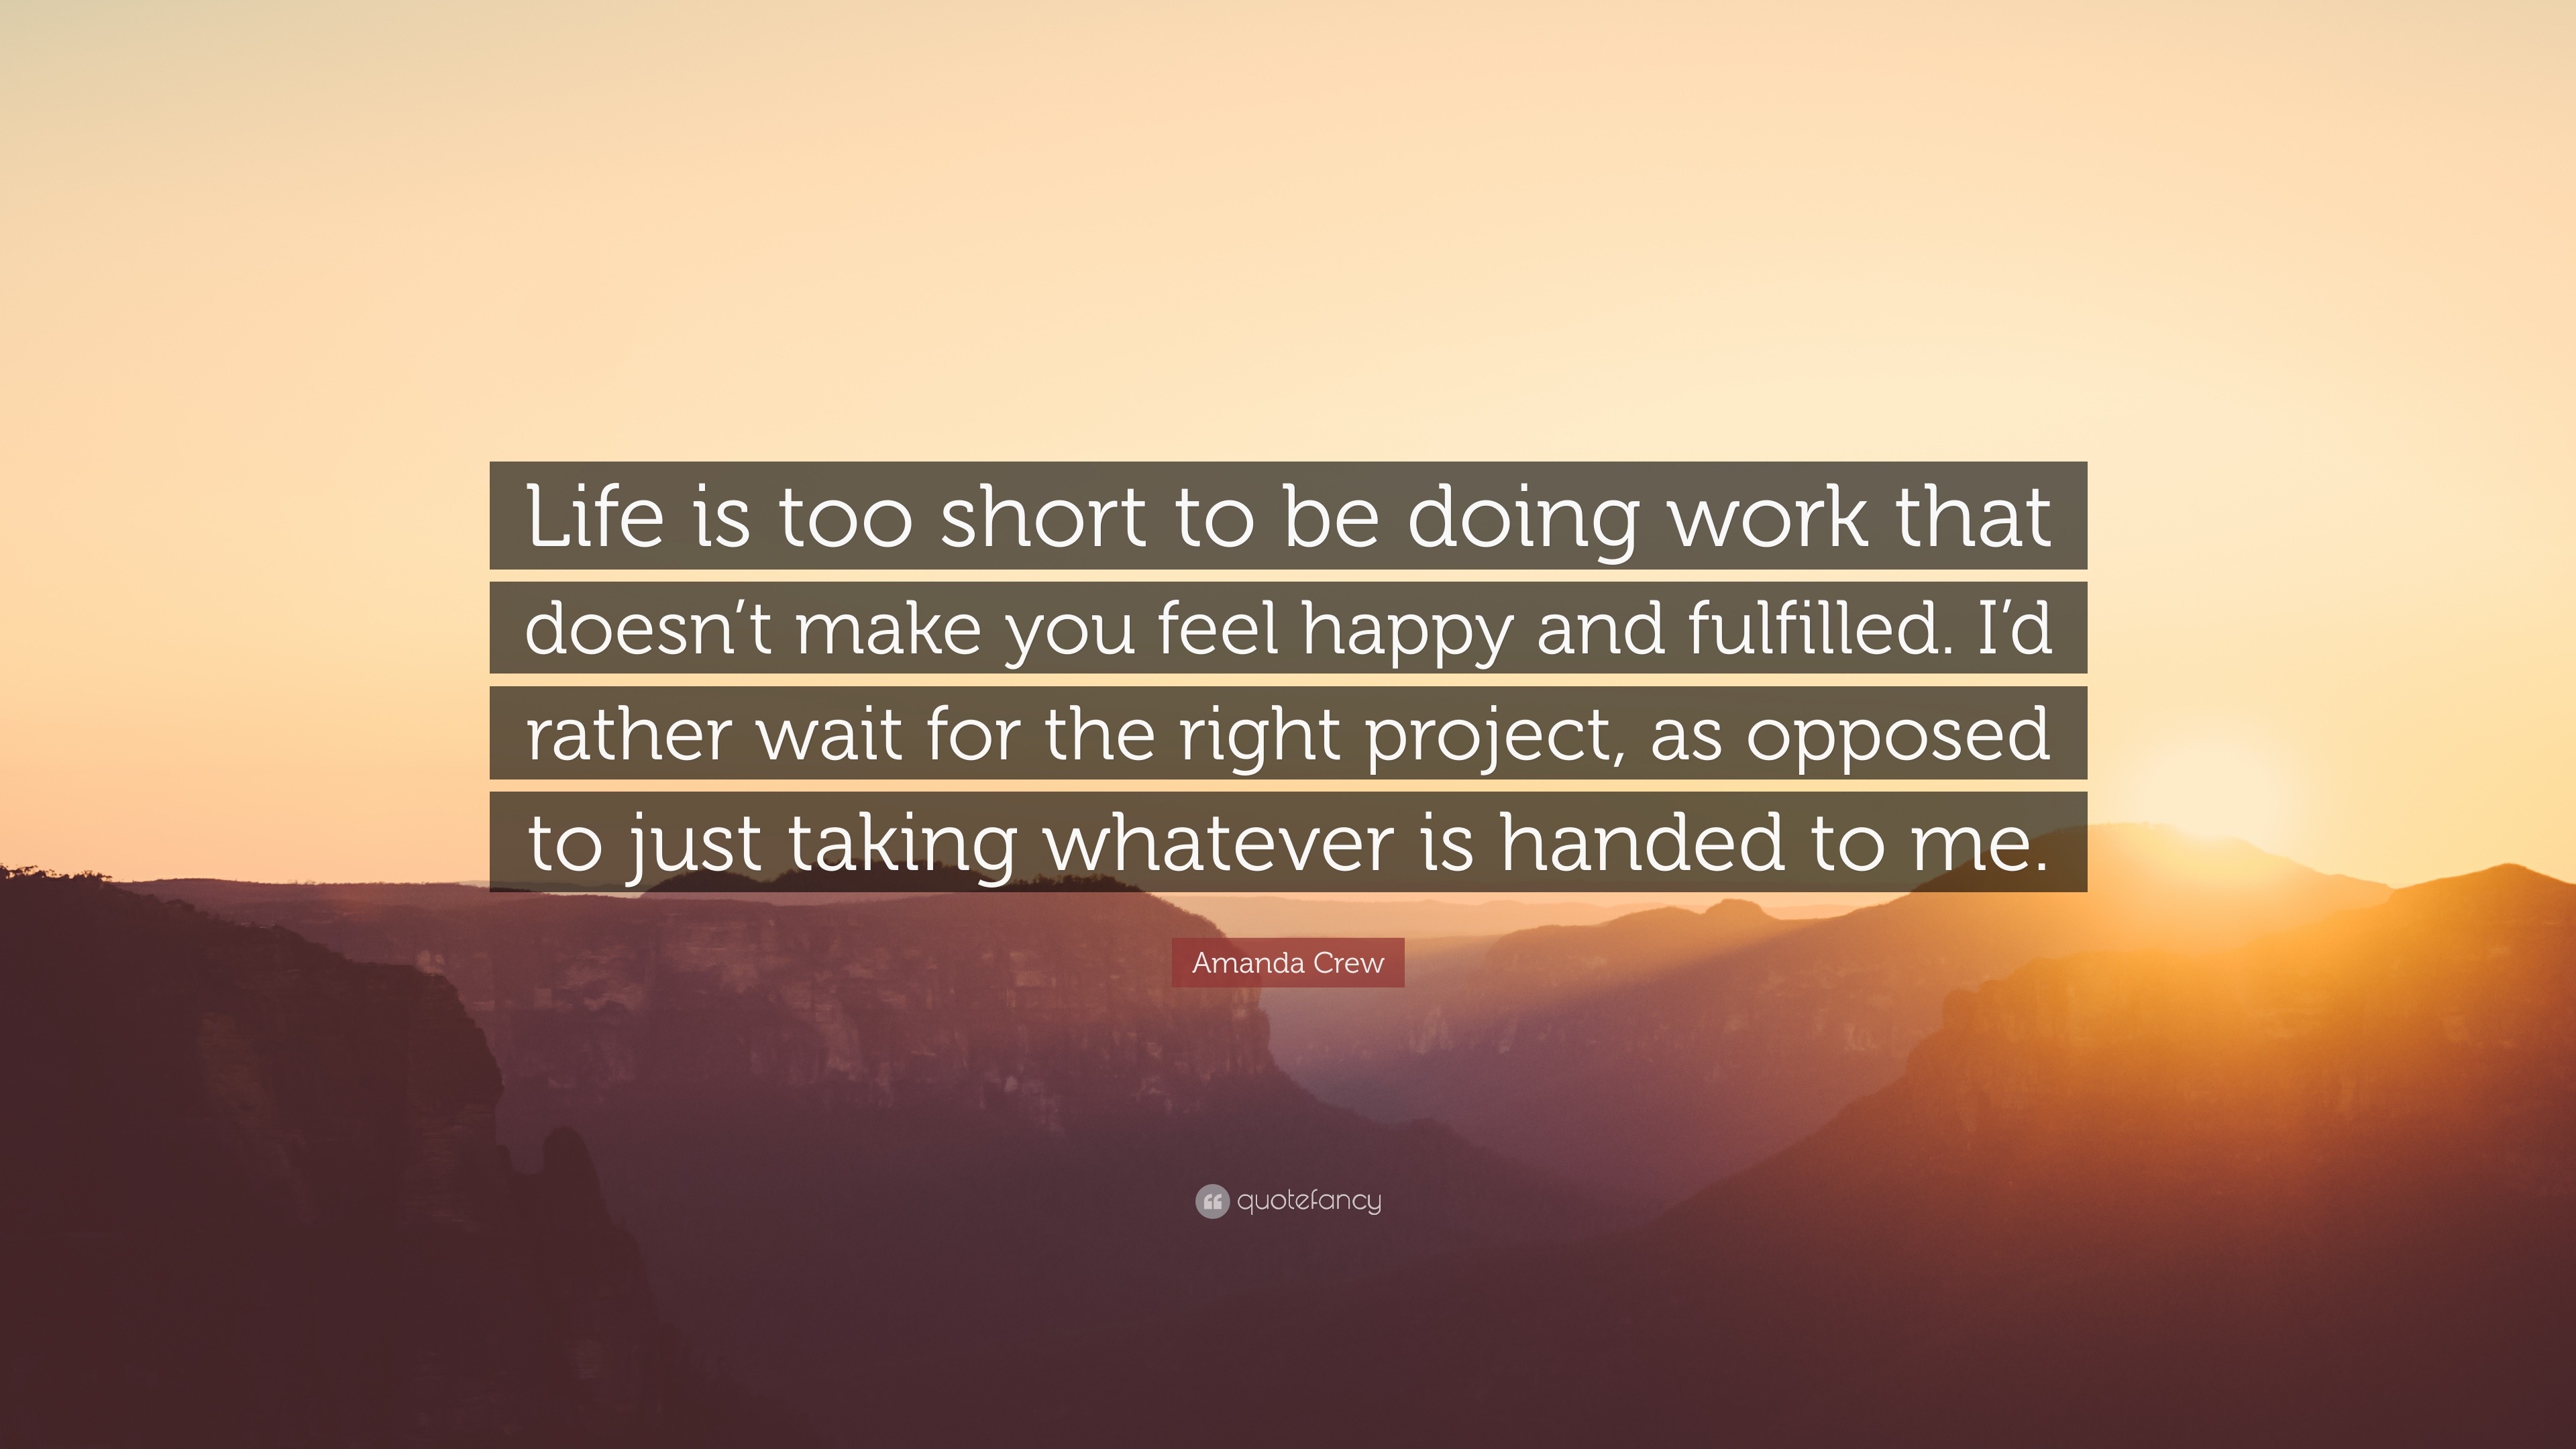 Amanda Crew Quote “Life is too short to be doing work that doesn